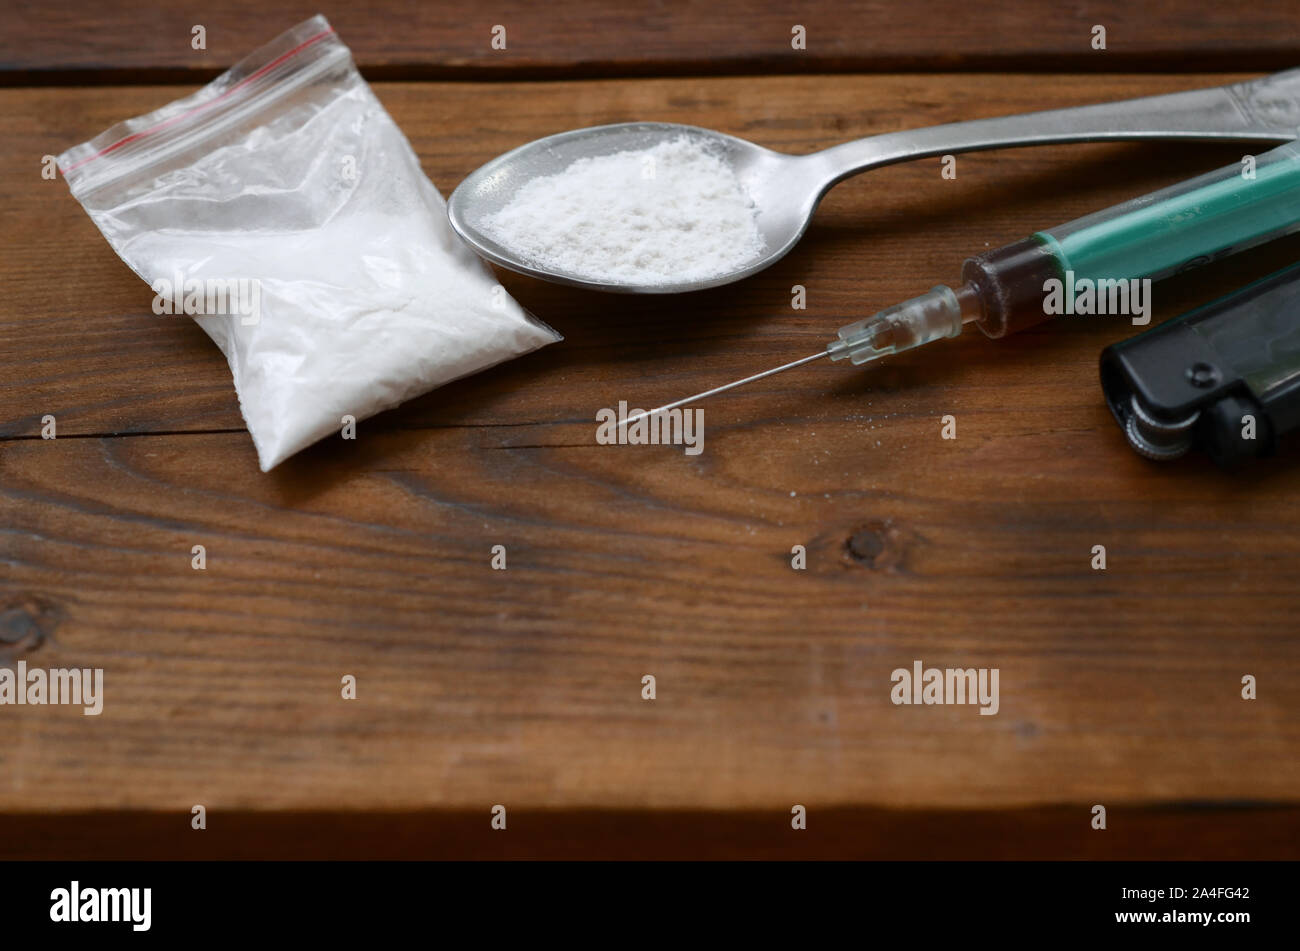 Drug dealer stuff. Syringe, lighter and spoon full of white powder on wooden background. Heroin and methamphetamine using. Narcotic addiction concept Stock Photo